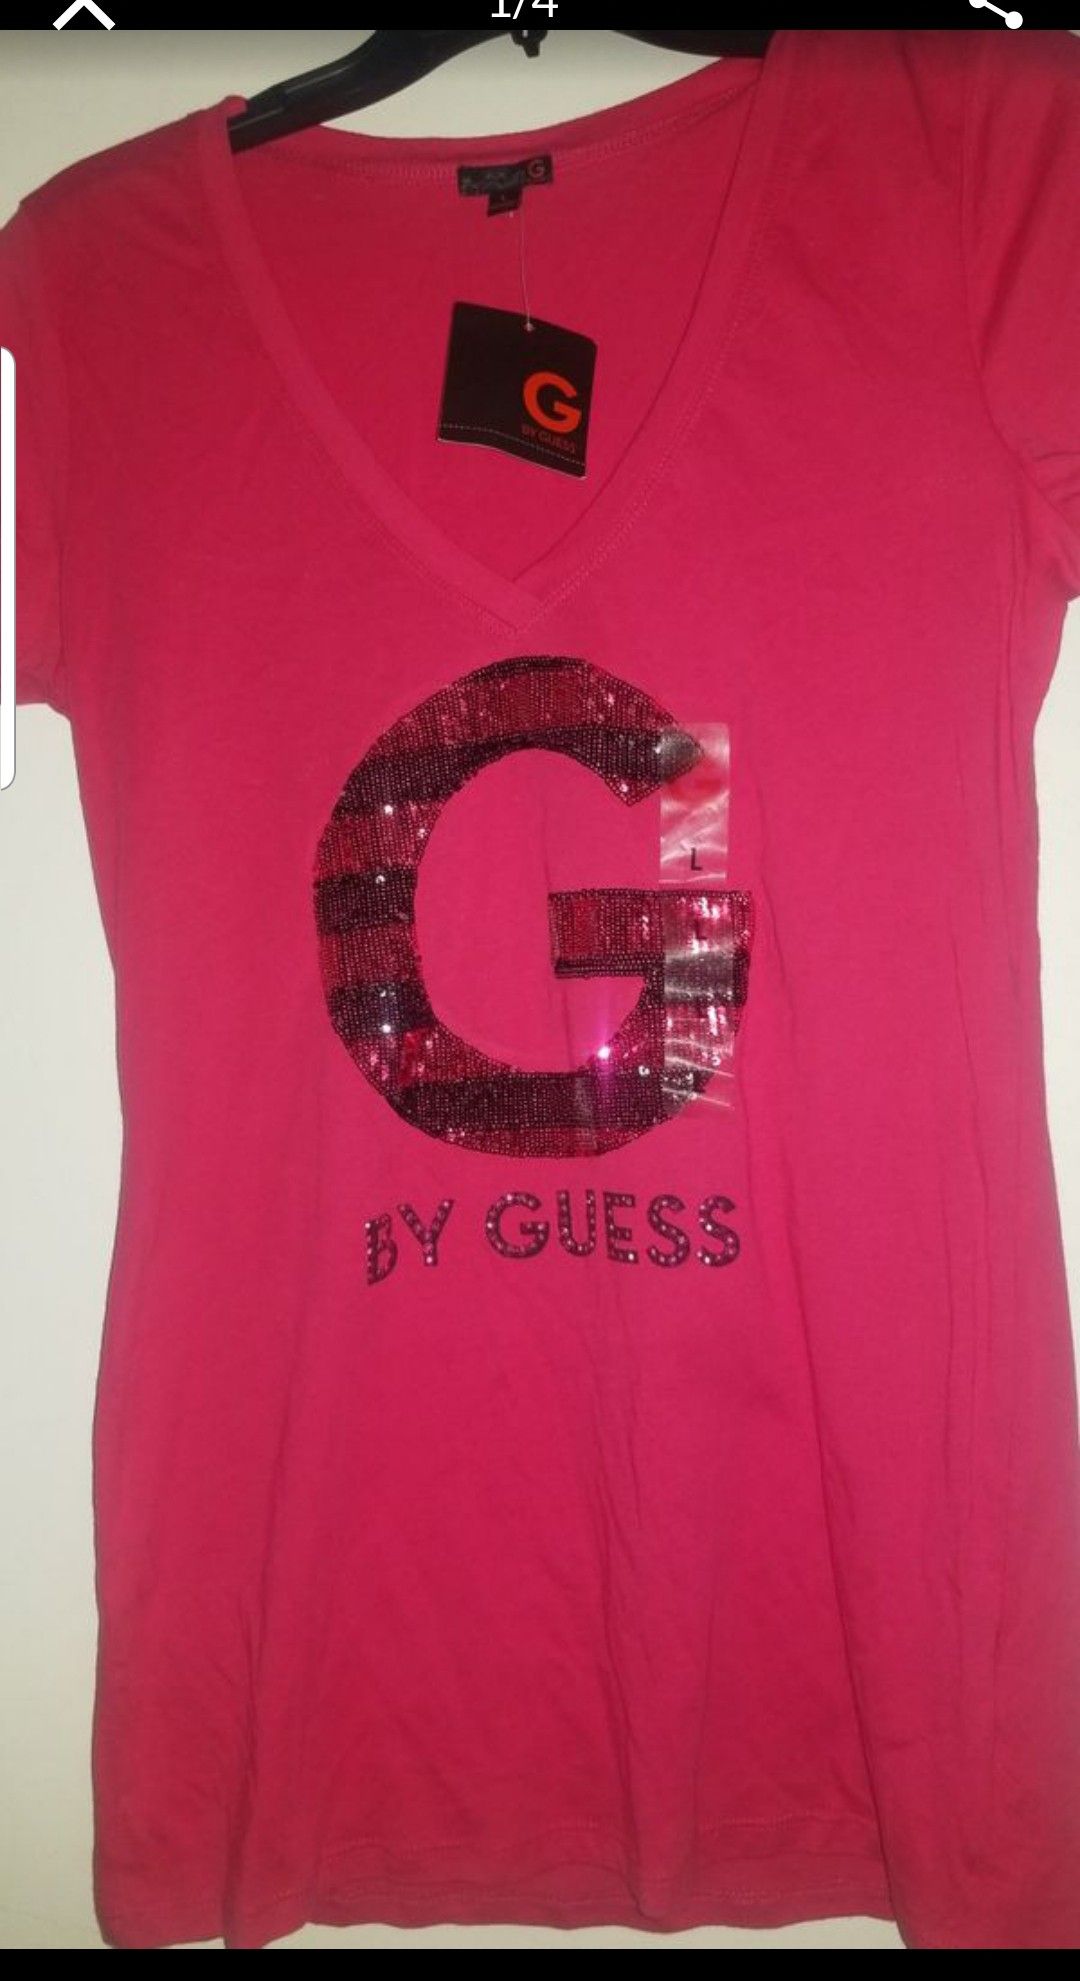 Guess shirt size large in juniors tag still on it